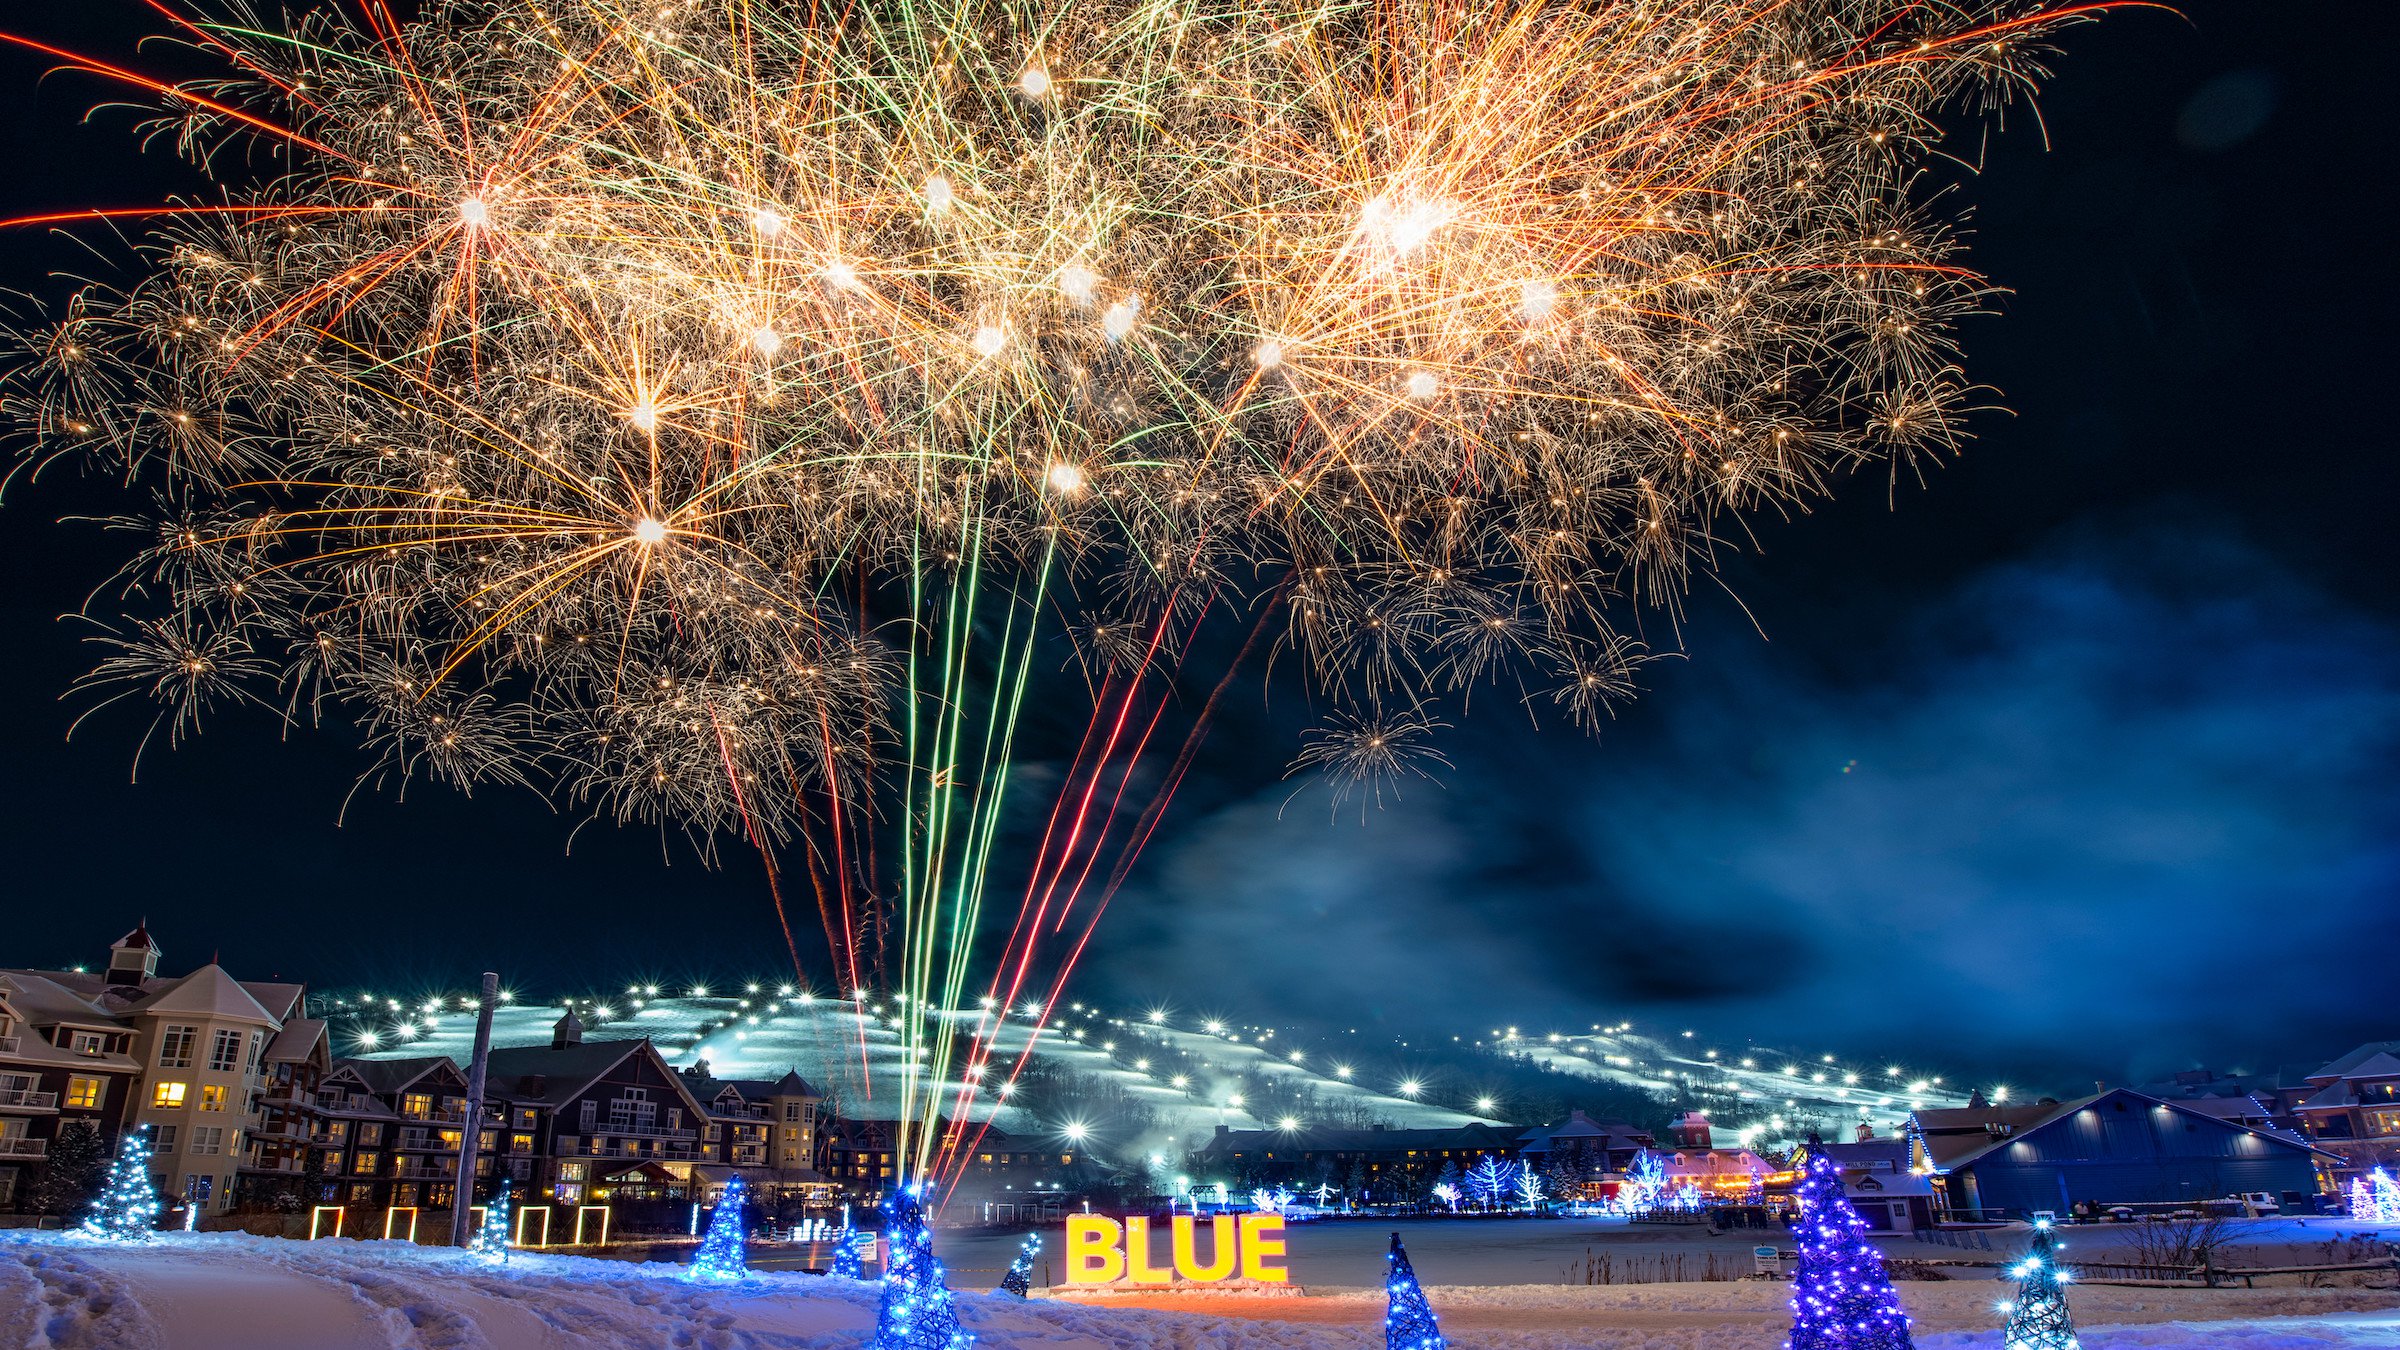 Fireworks over Blue Mountain Village with Blue Mountain ski hill in background